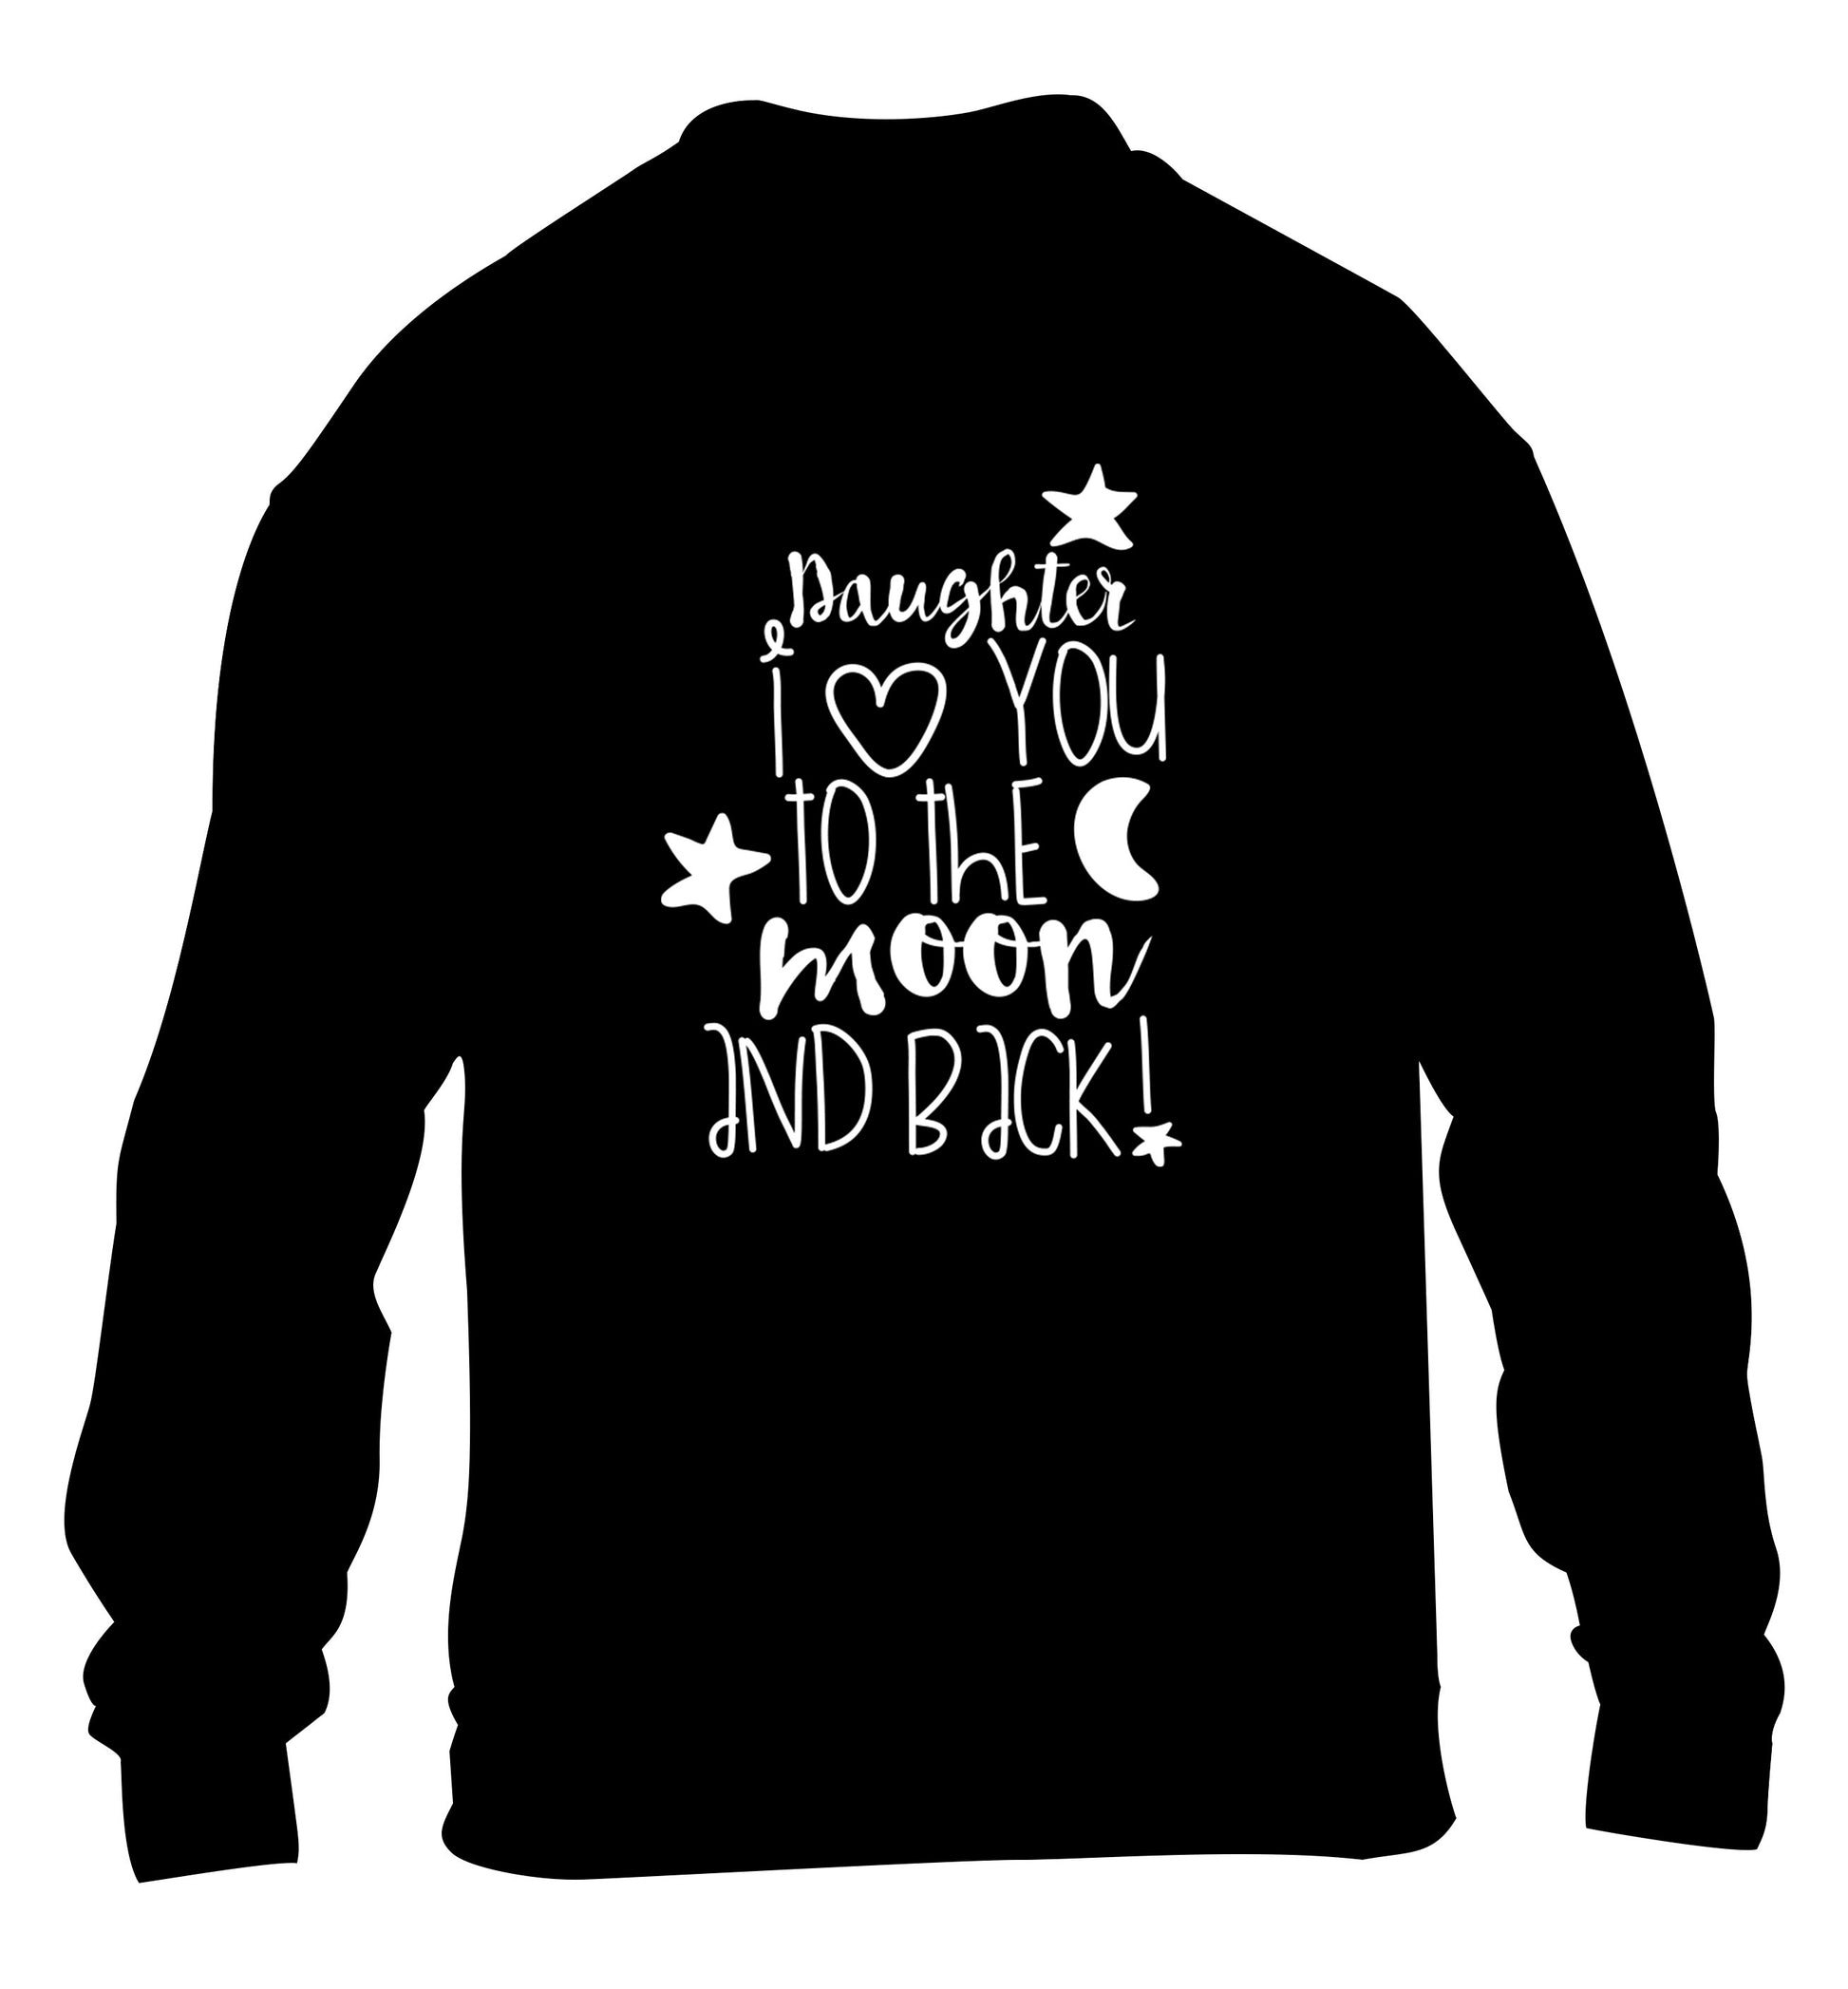 Daughter I love you to the moon and back children's black  sweater 12-14 Years